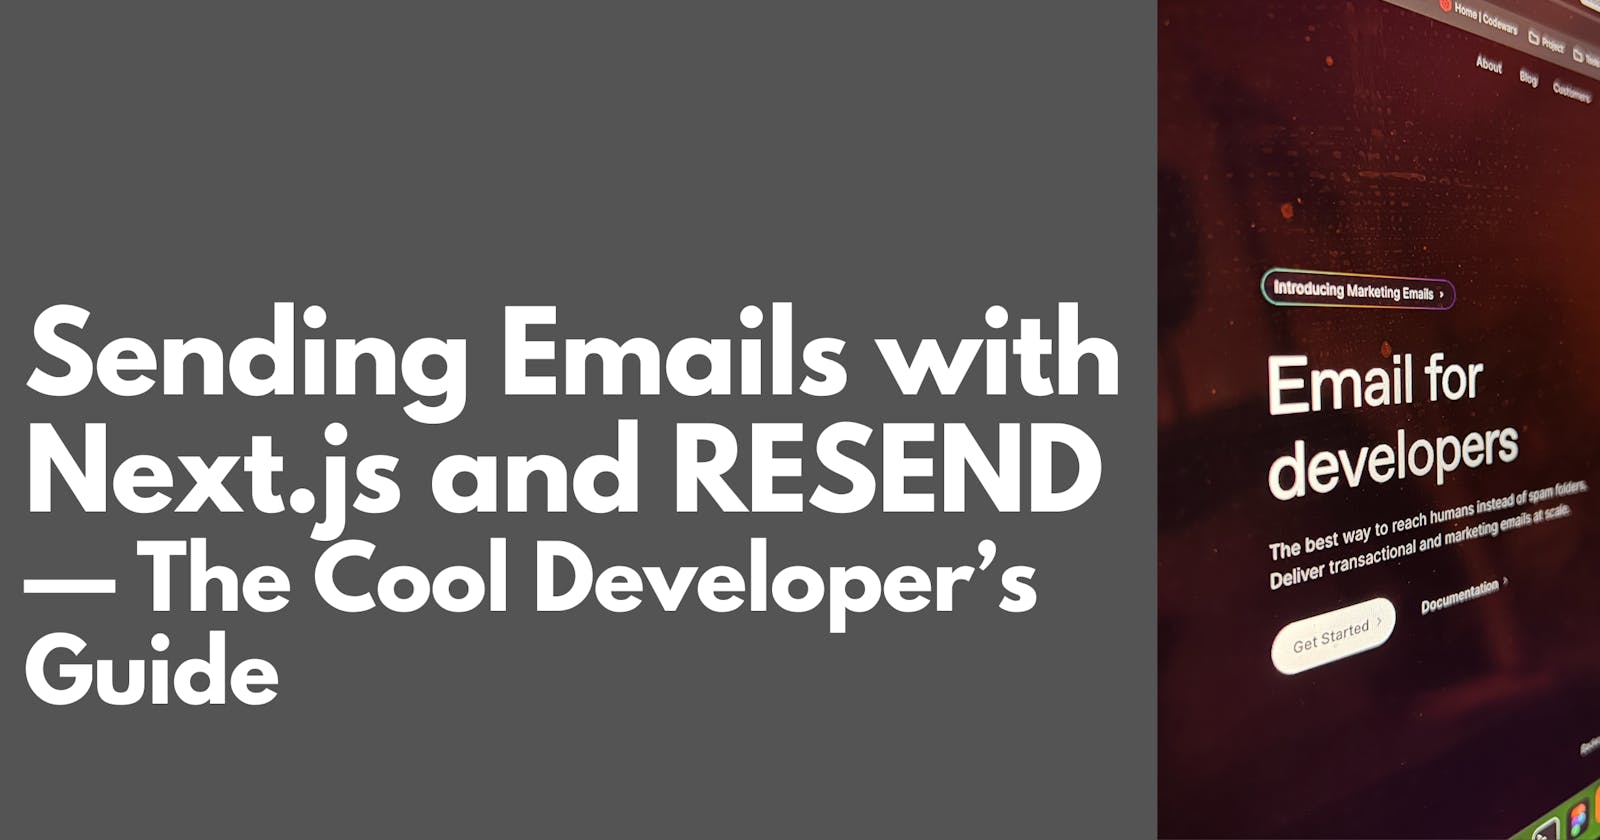 Sending Emails with Next.js and RESEND — The Cool Developer’s Guide